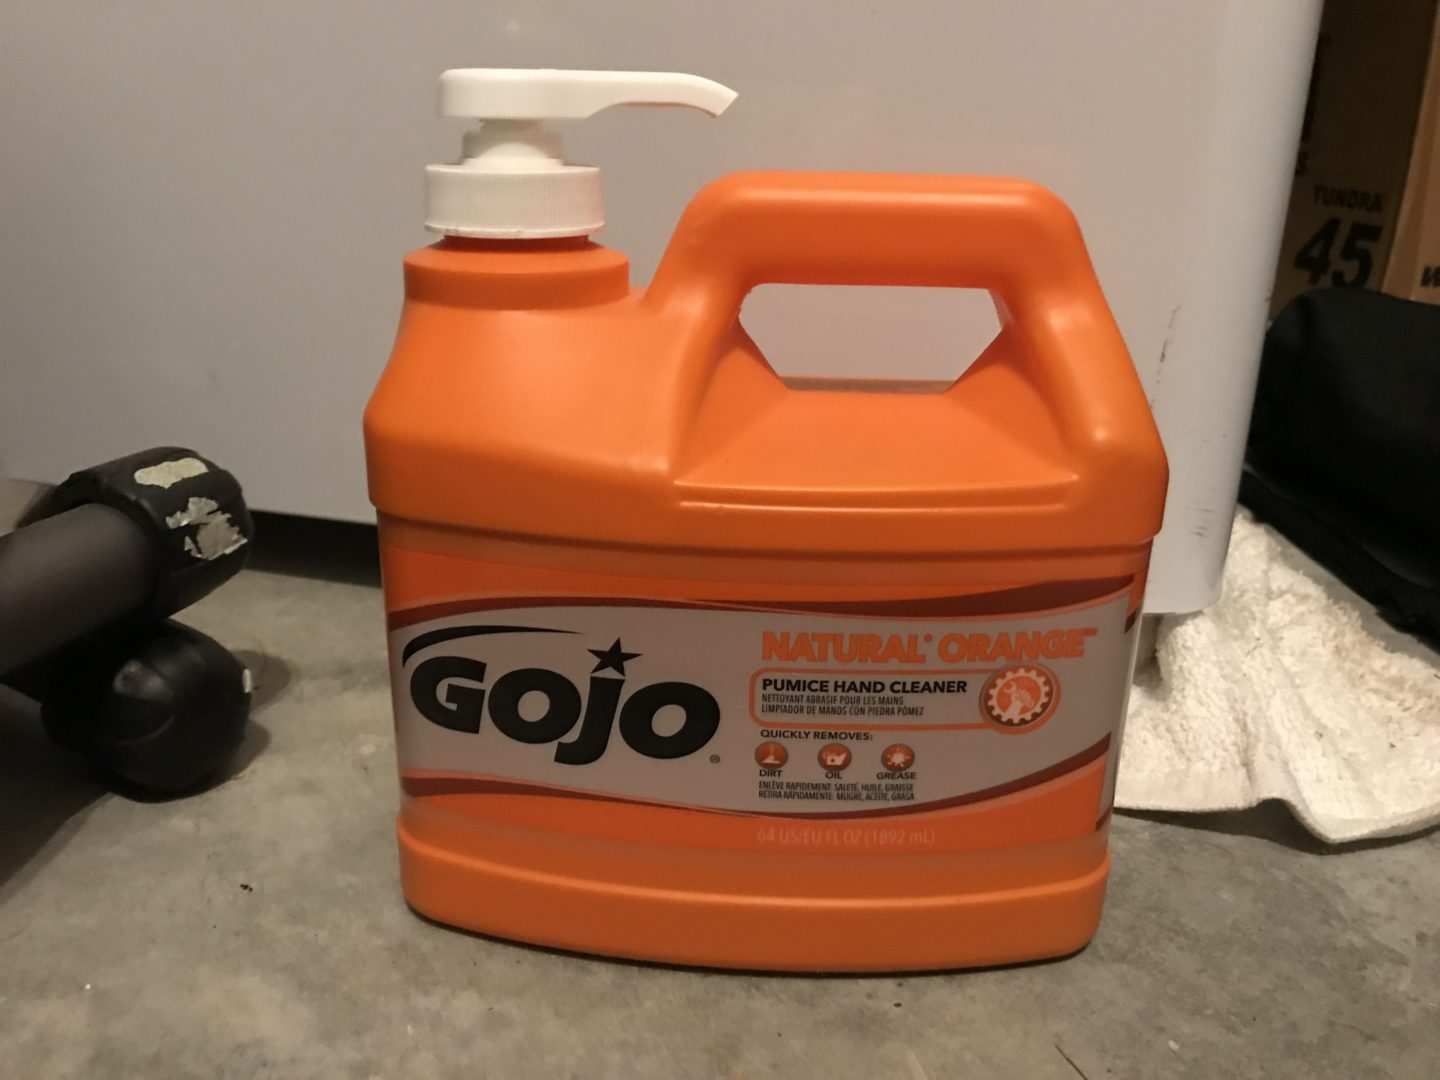 Gojo Orange Hand Cleaner Review - The Track Ahead